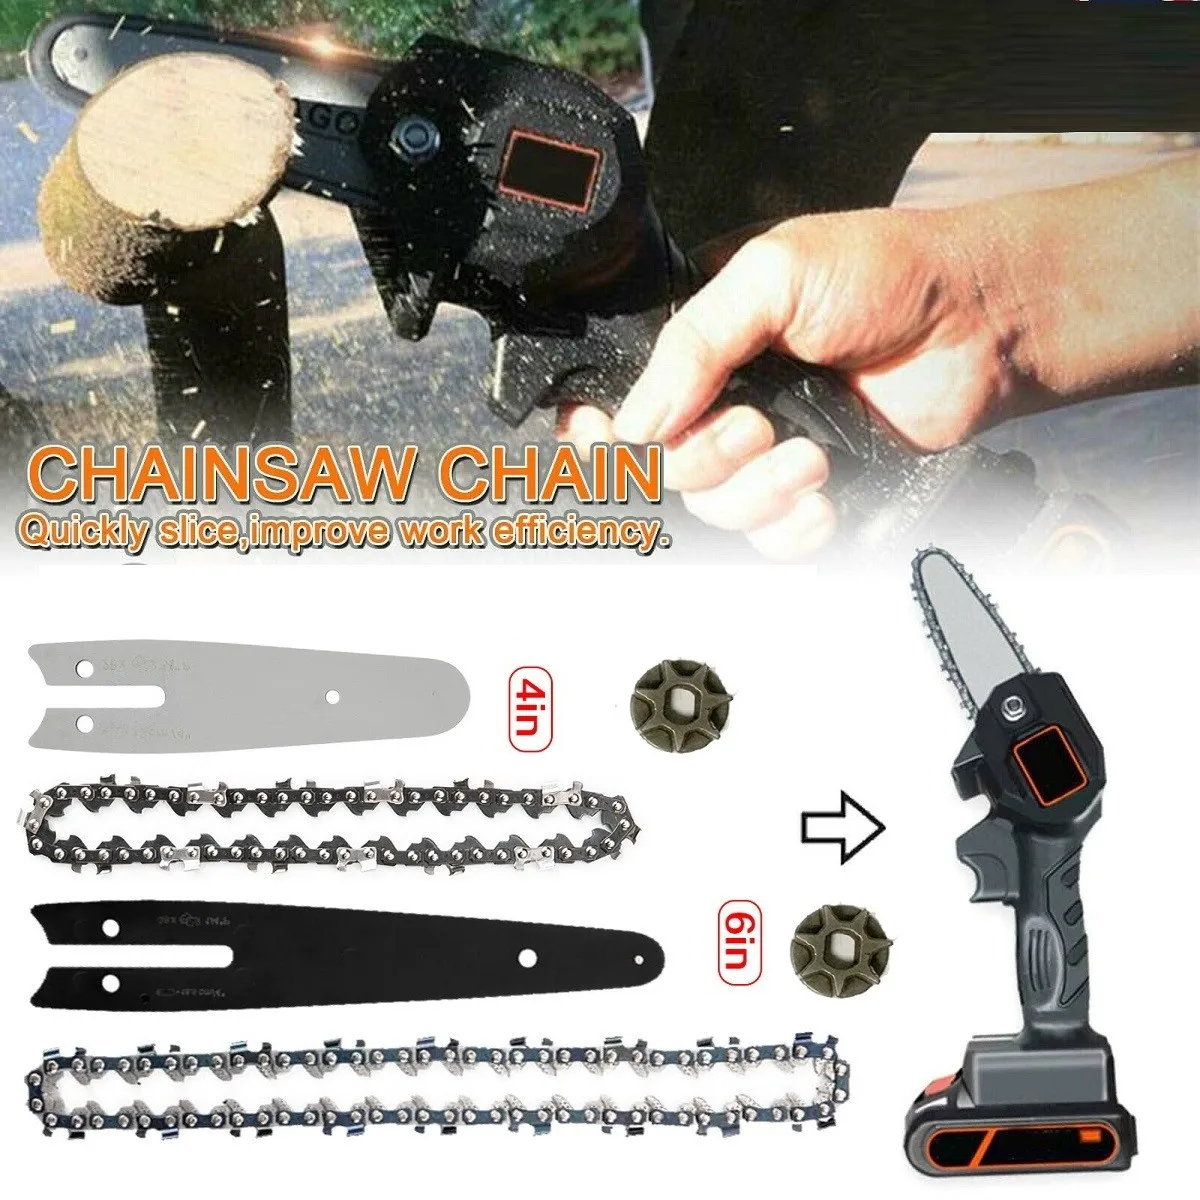 

4/6Inch Chainsaw Guide Bar And Saw Chain Set Fits Electric Chain Saw For Logging And Pruning Wood Cutter Power Tool Accessorie